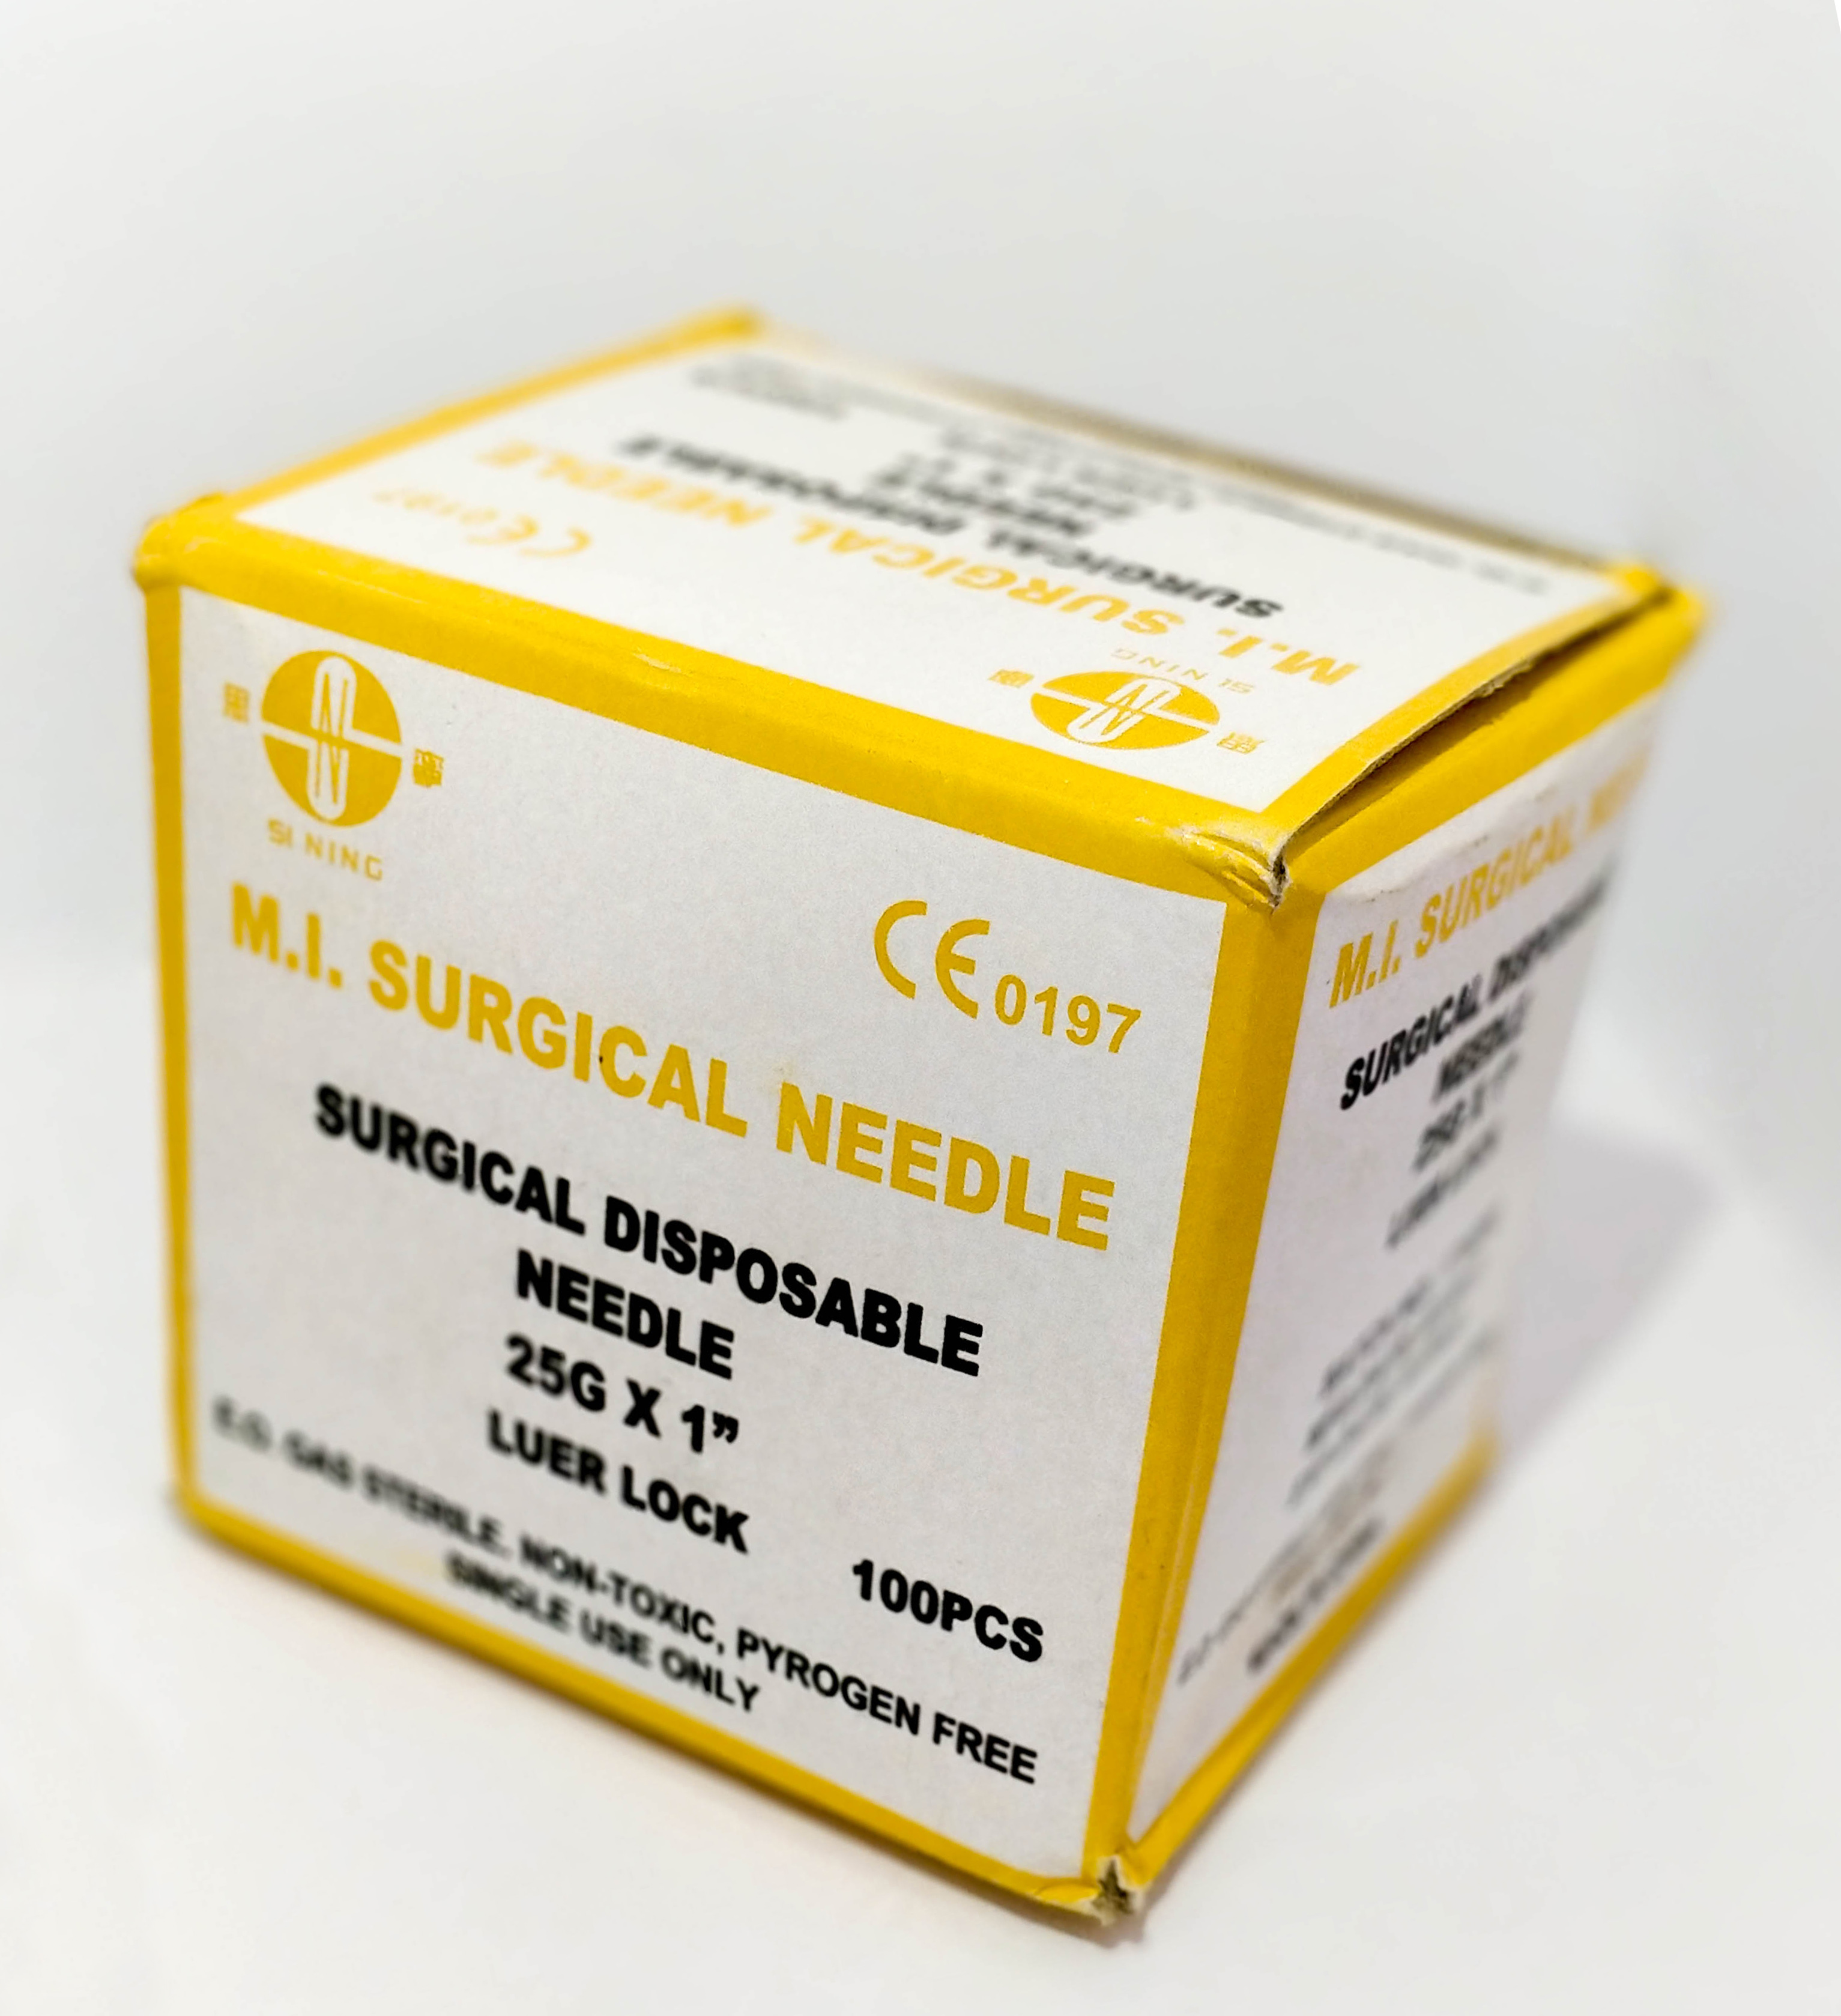 Surgical Needle 25G